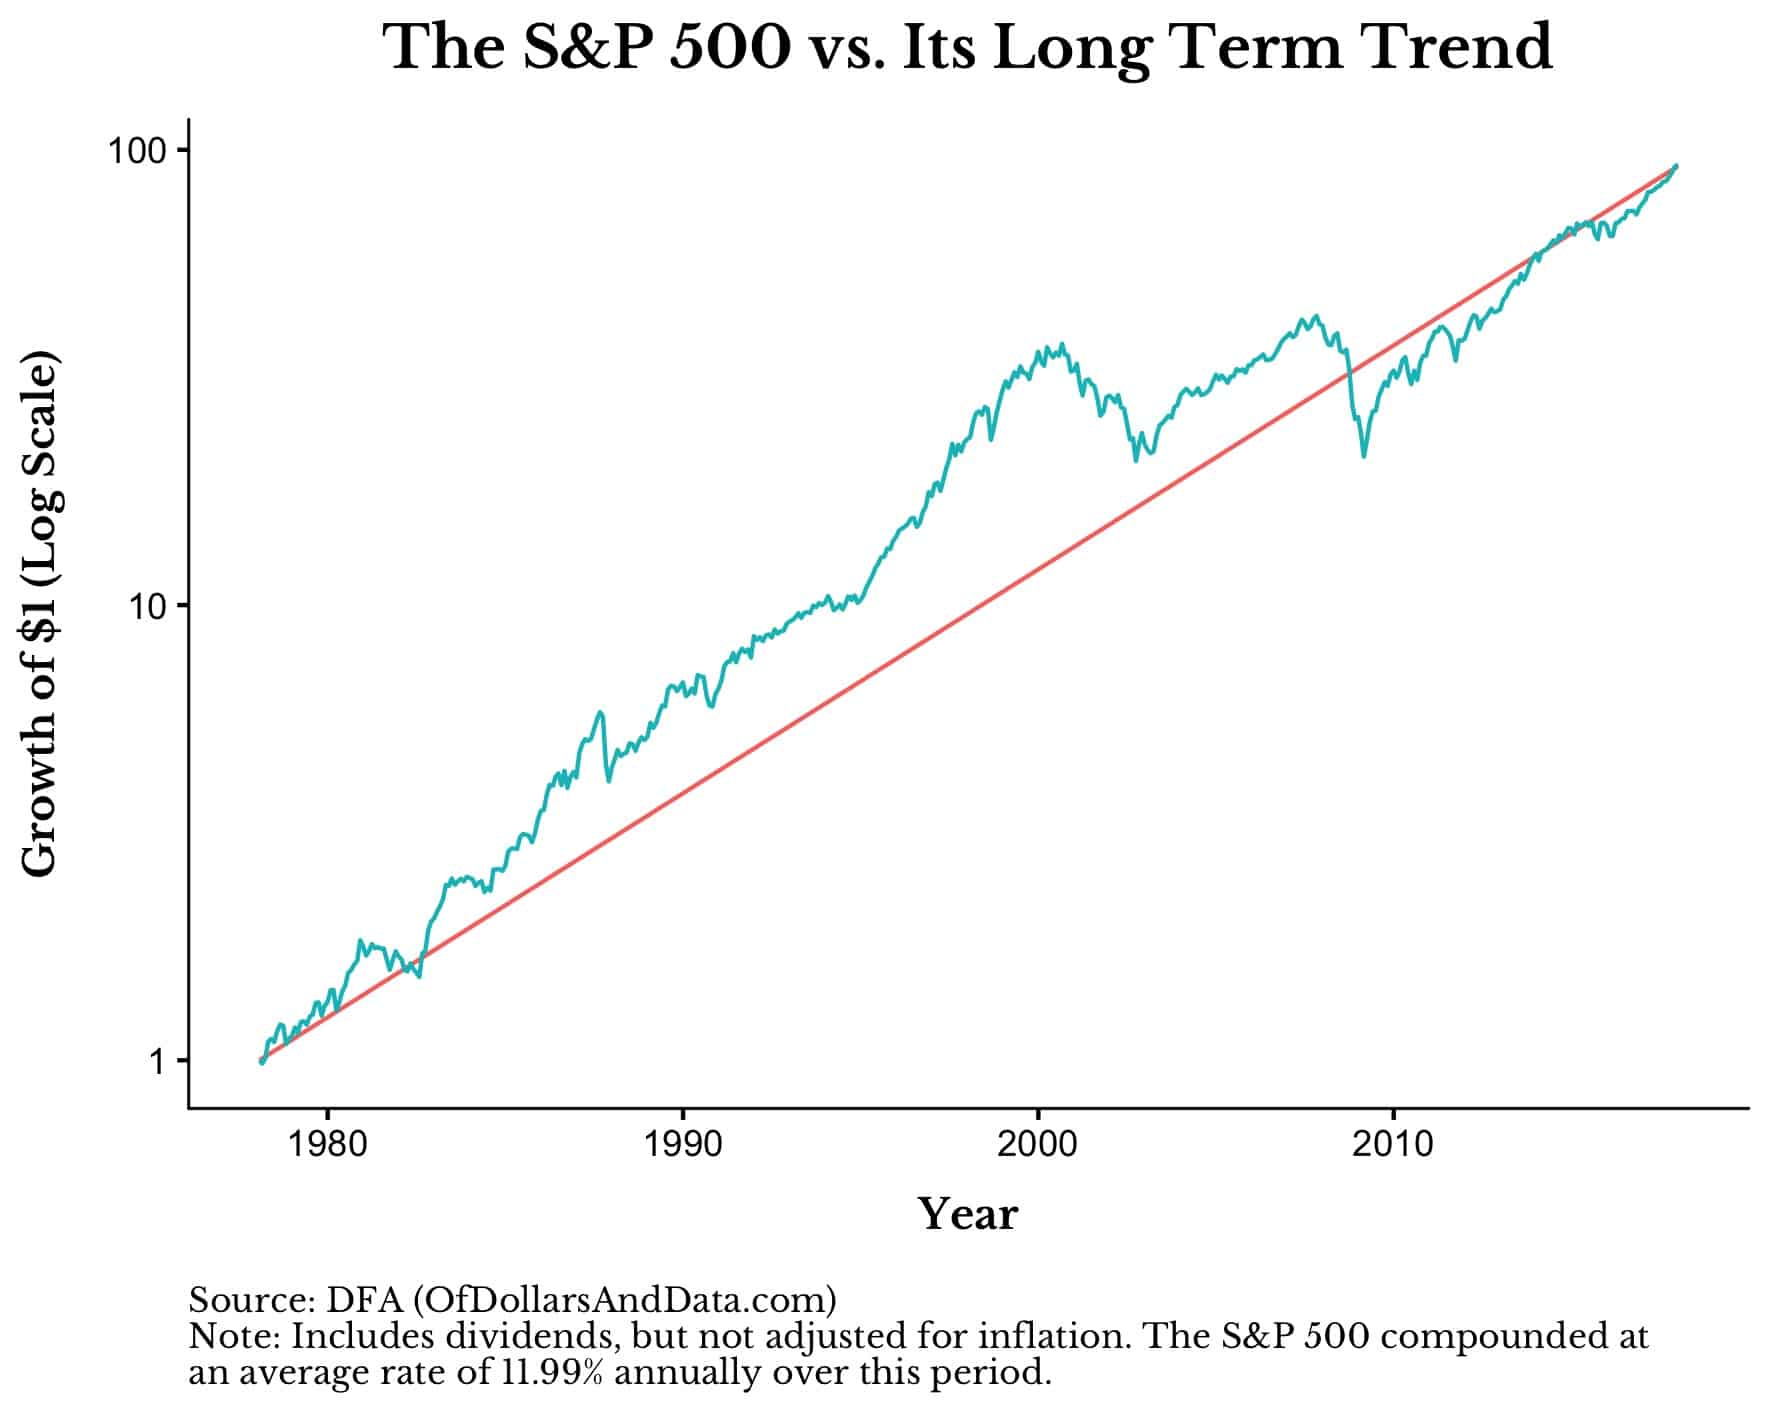 The S&P 500 vs its long-term trend since 1980